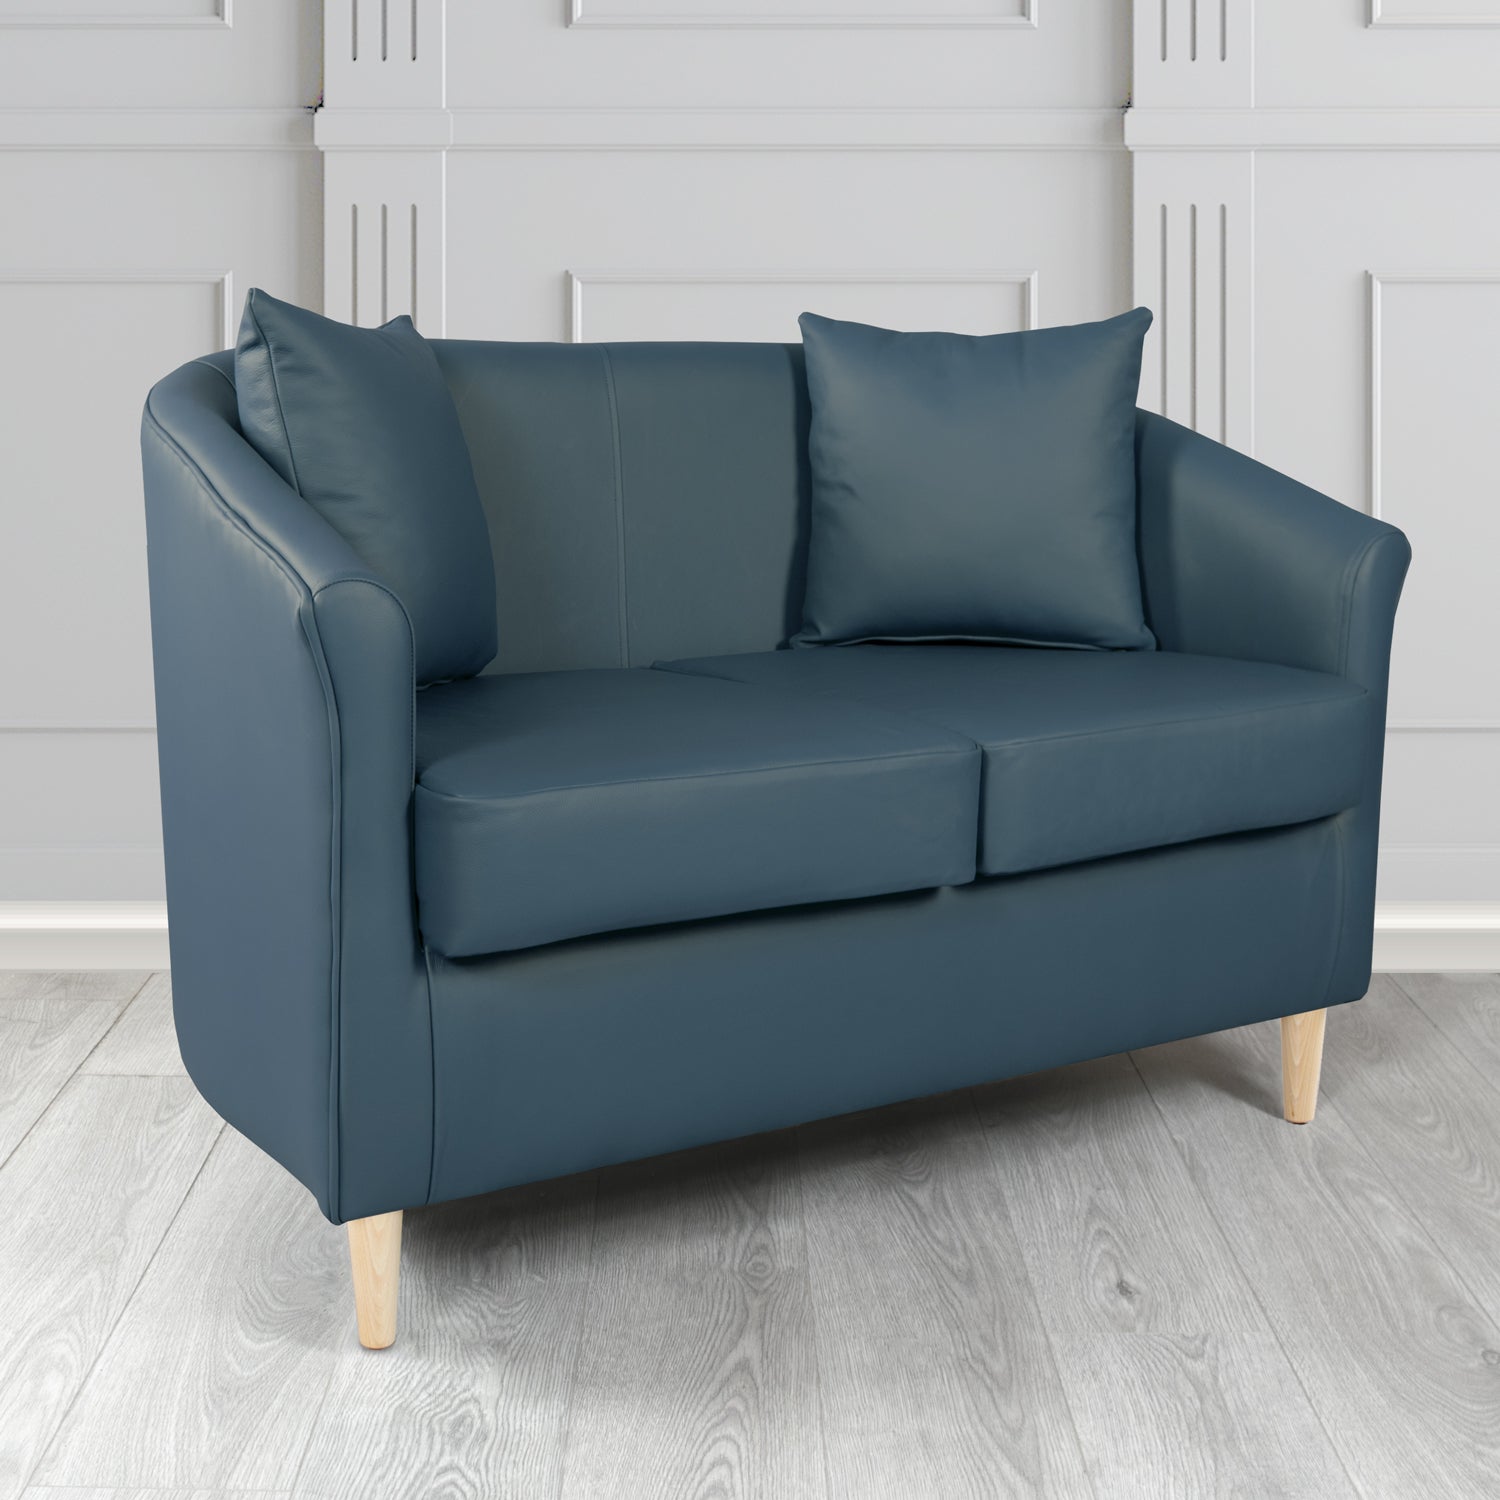 St Tropez Shelly Suffolk Blue Crib 5 Genuine Leather 2 Seater Tub Sofa with Scatter Cushions - The Tub Chair Shop